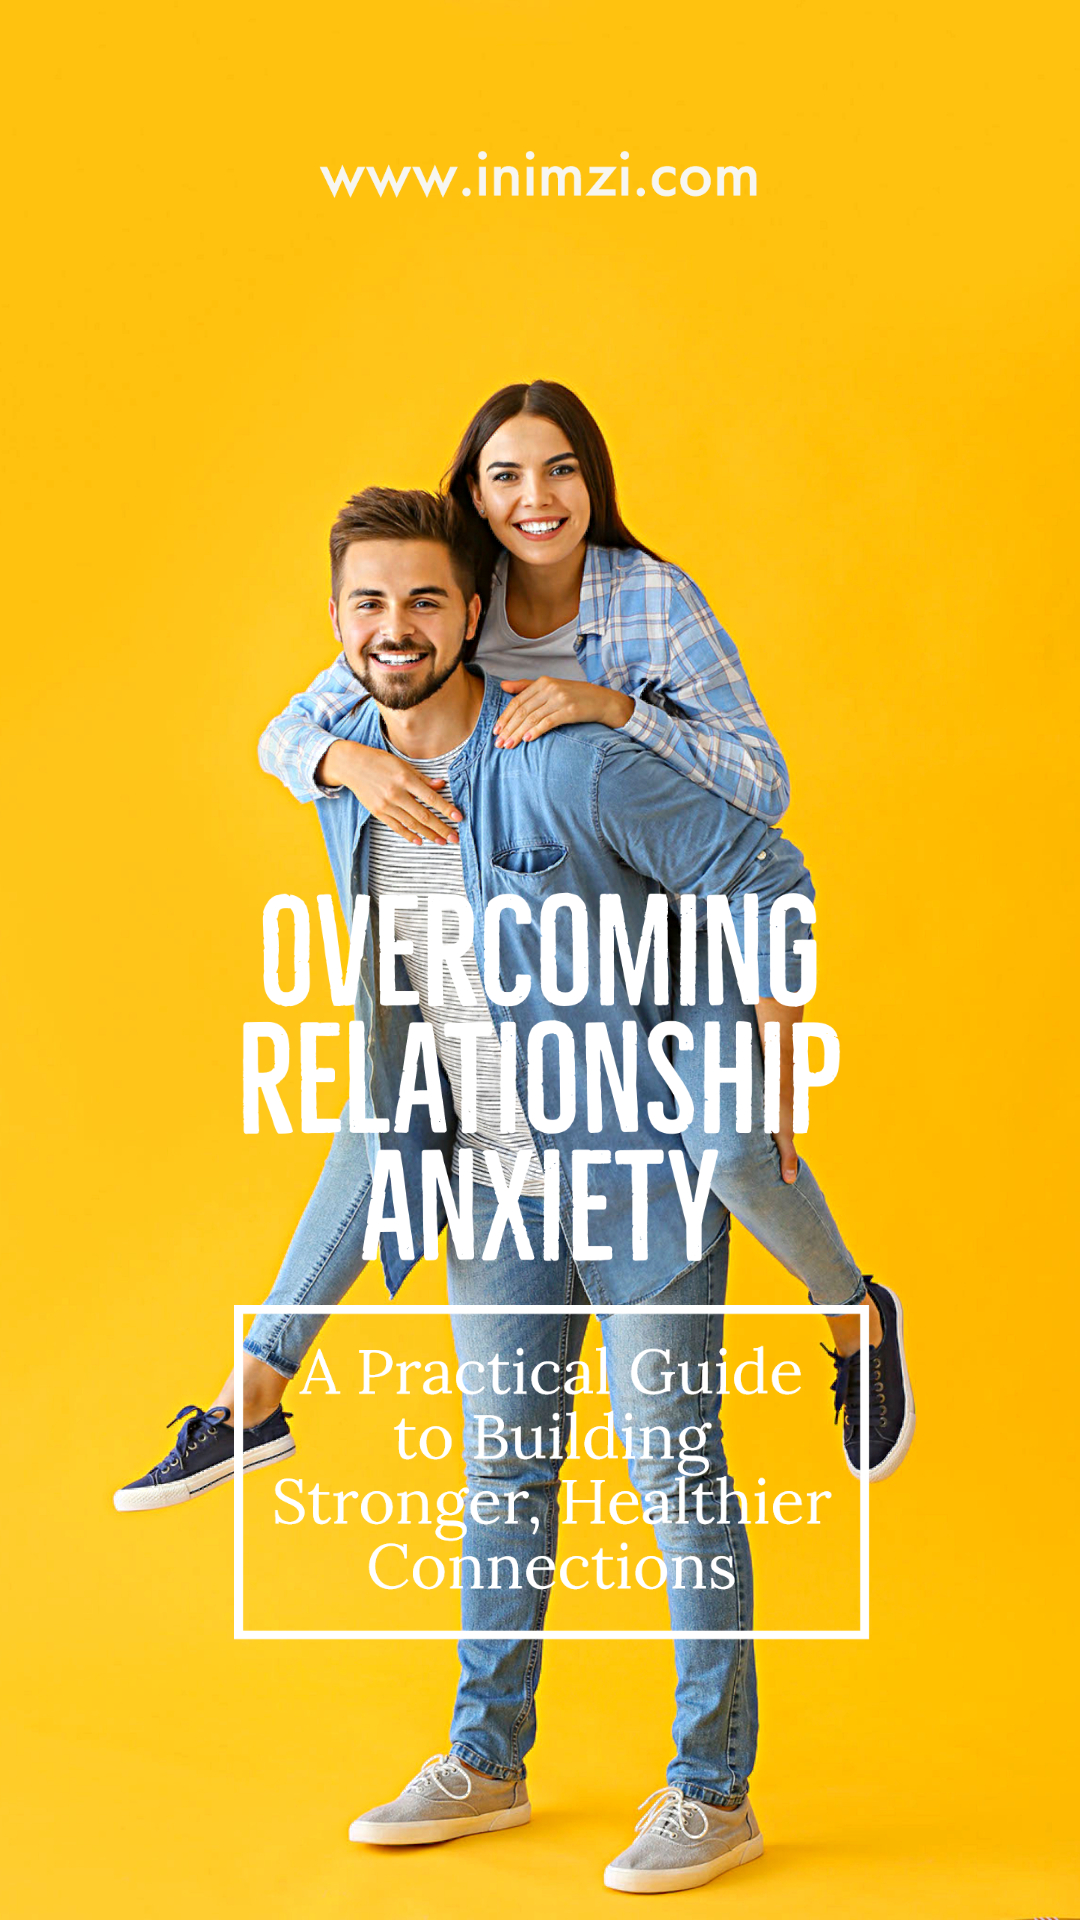 Overcoming relationship anxiety